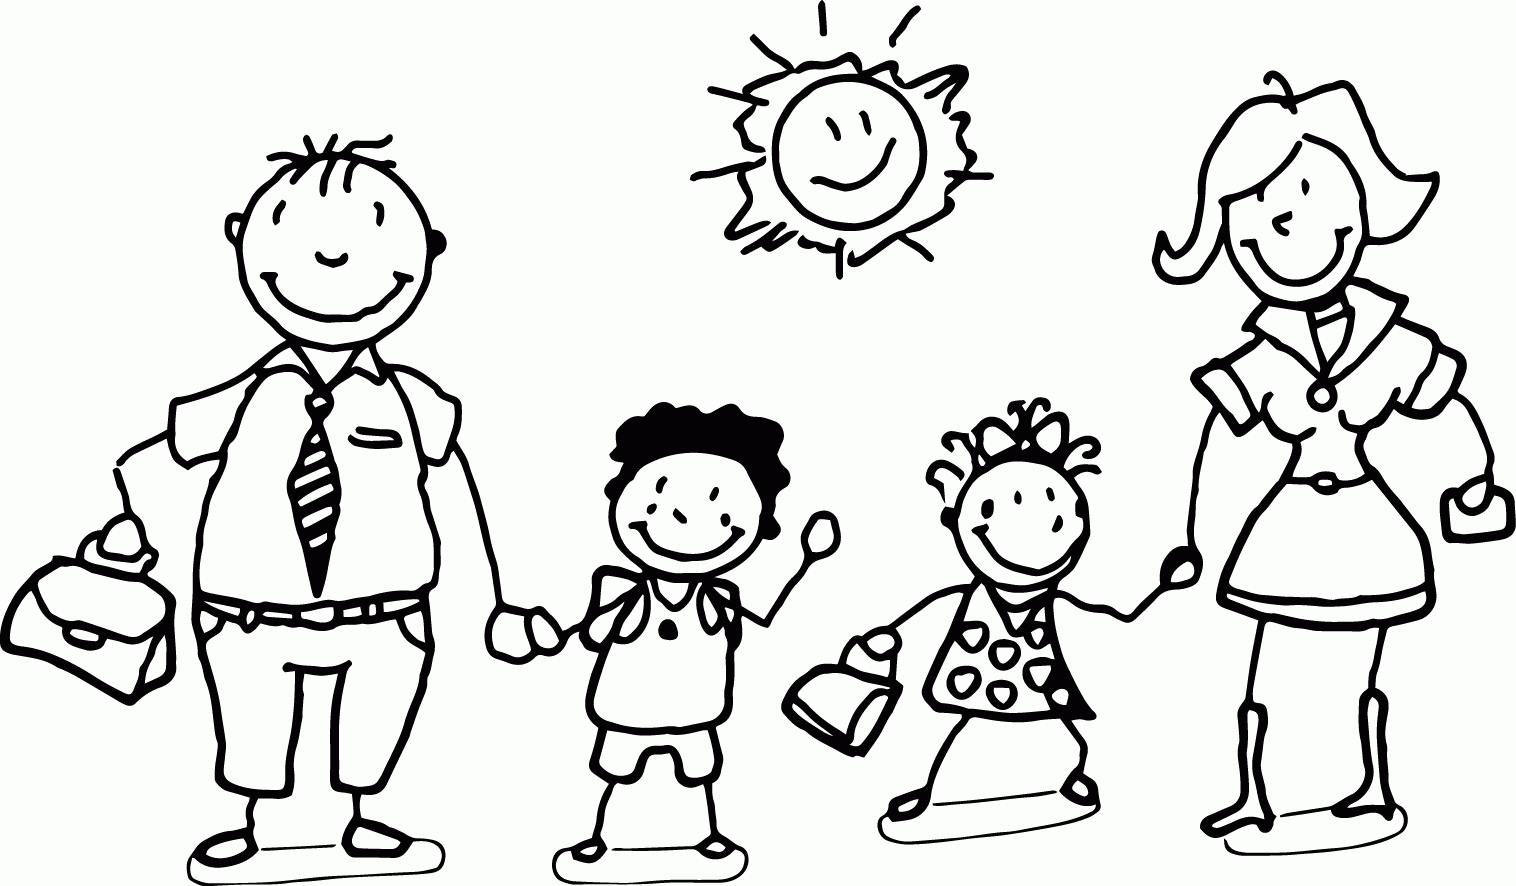 Free Family Picture Coloring Page, Download Free Clip Art